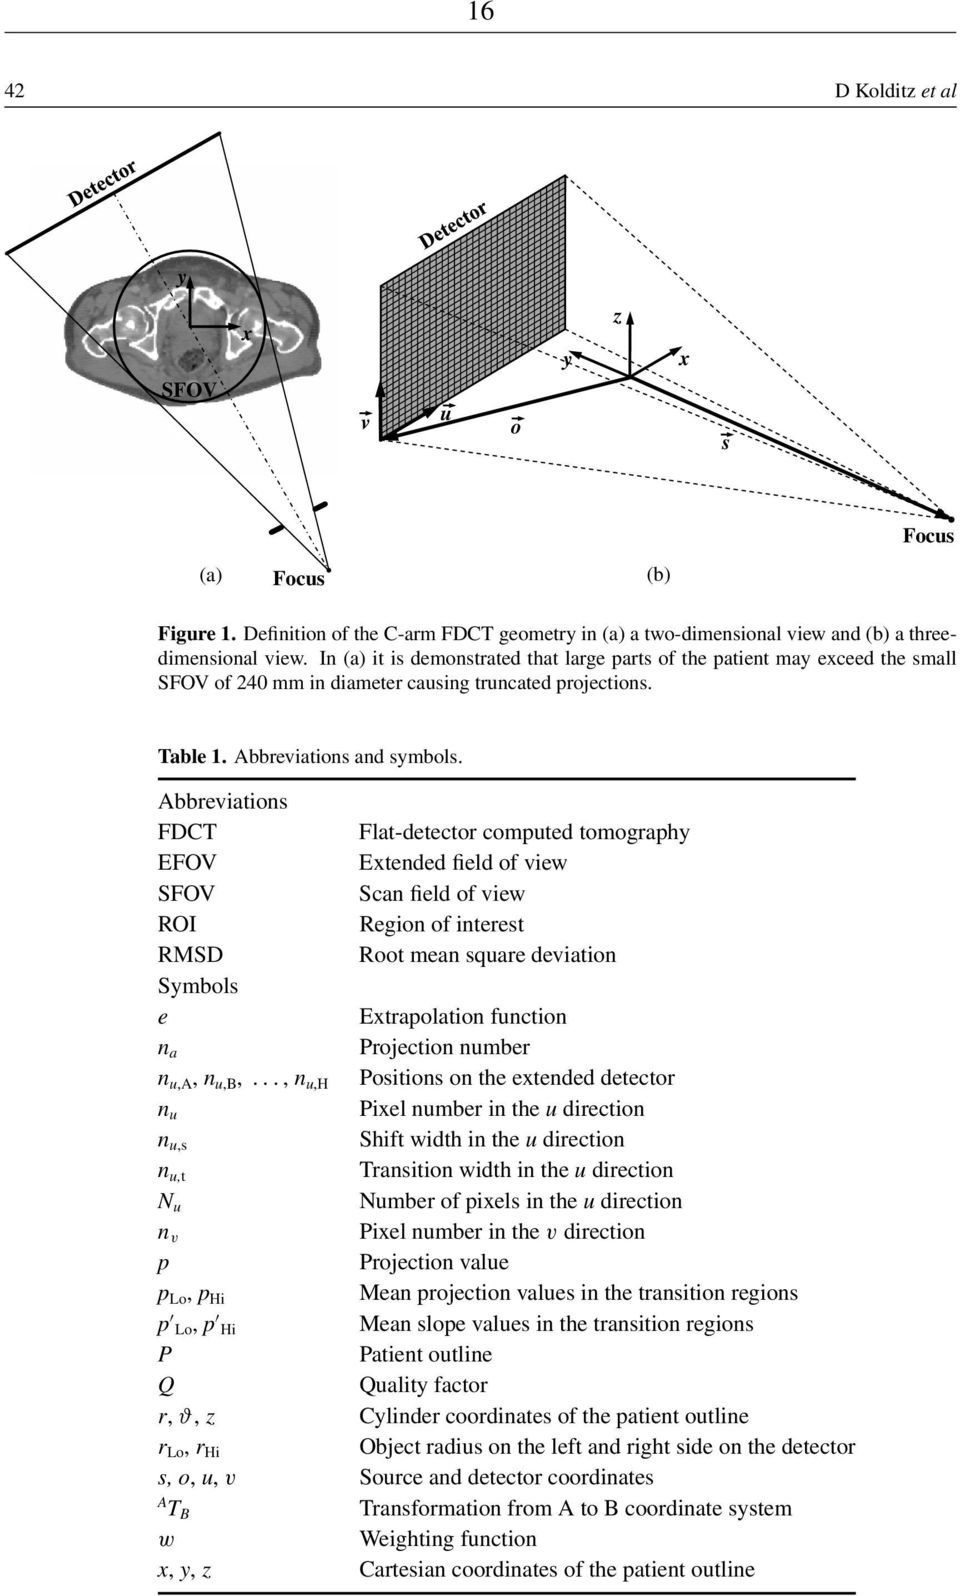 Abbreviations FDCT Flat-detector computed tomography EFOV Extended field of view SFOV Scan field of view ROI Region of interest RMSD Root mean square deviation Symbols e Extrapolation function n a